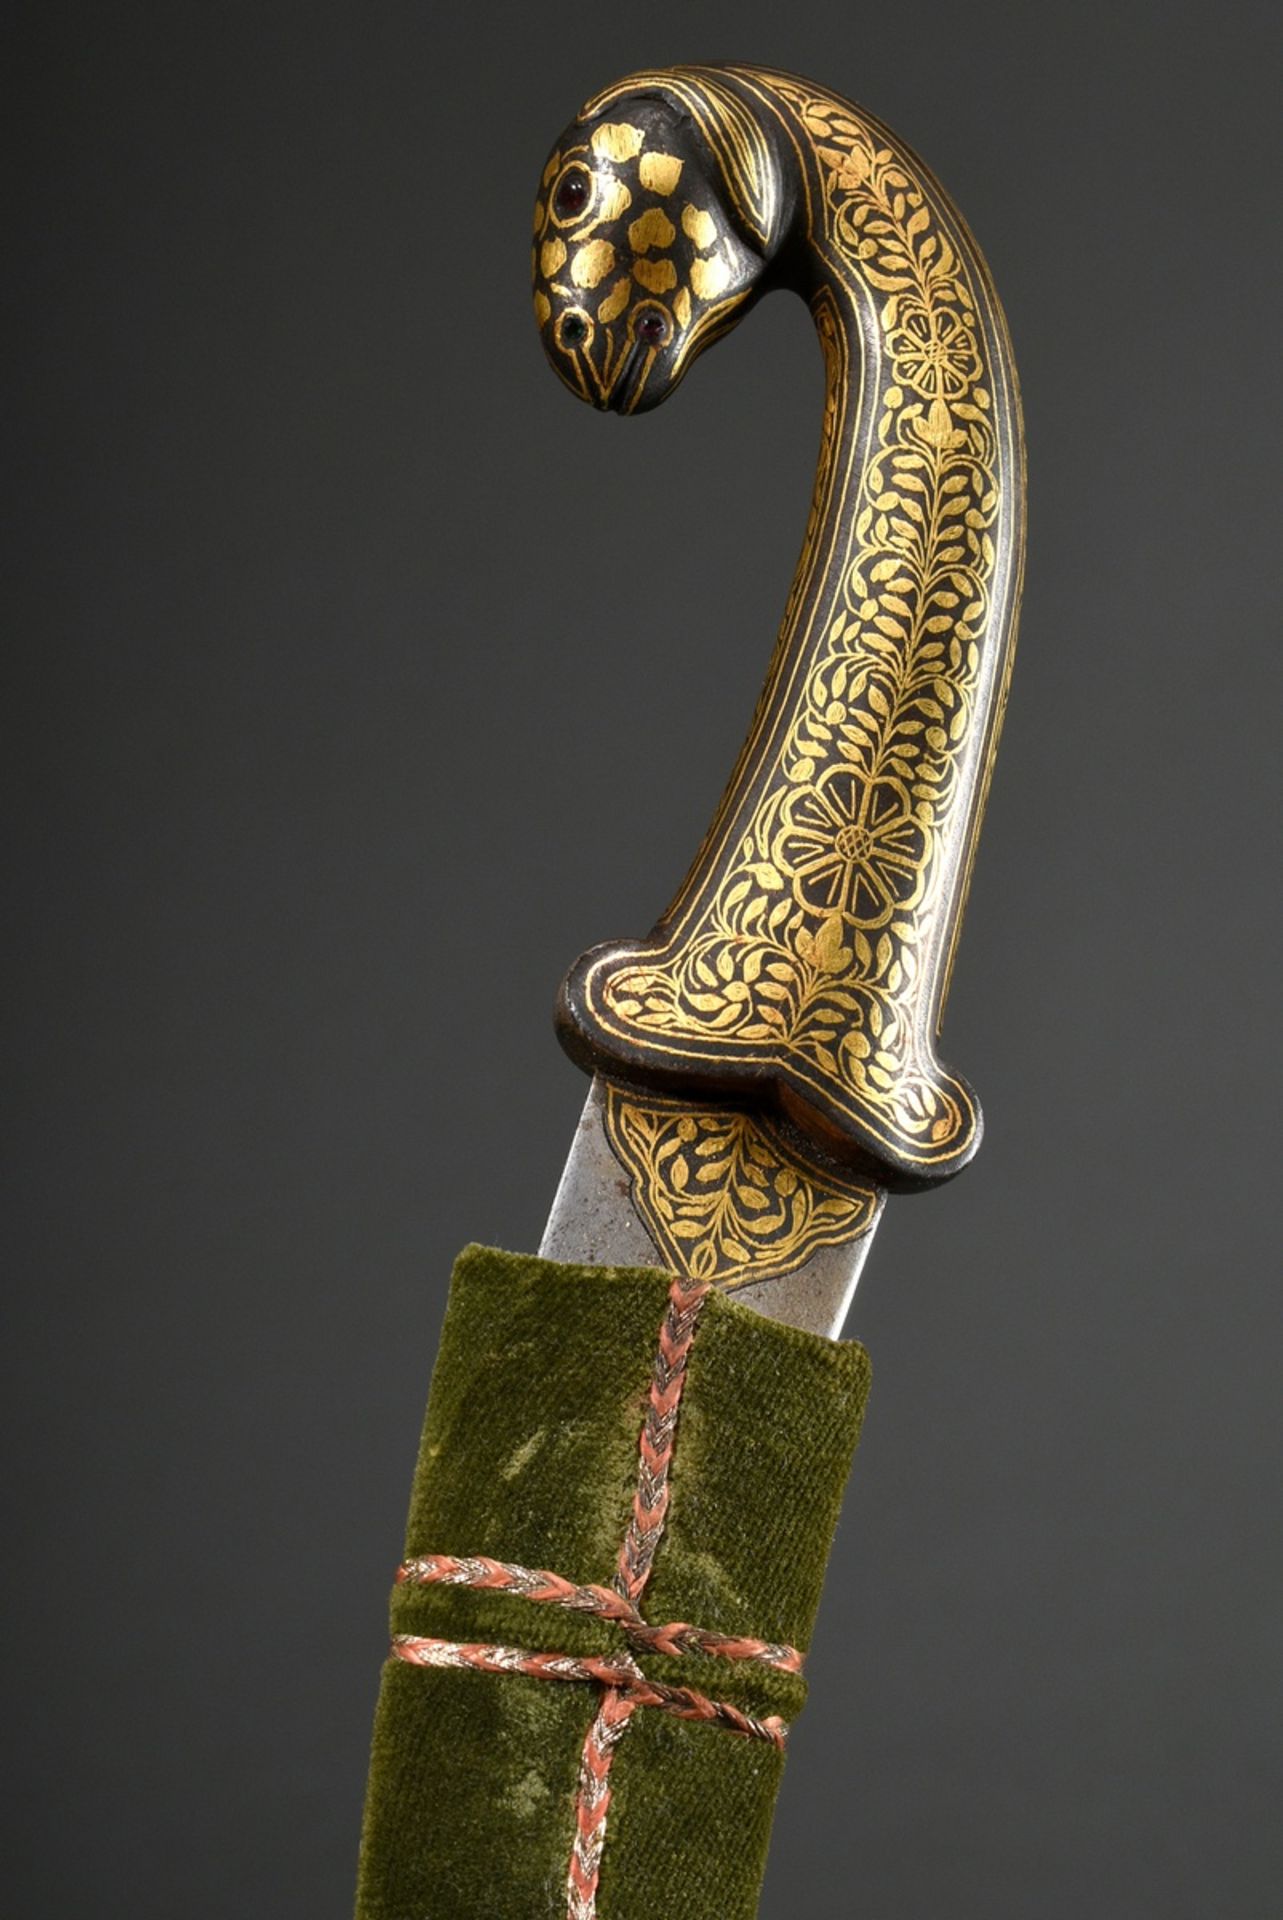 Indian "Khanjar" dagger with sculpted "sheep's head" handle end, inlaid with glass cabochons, handl